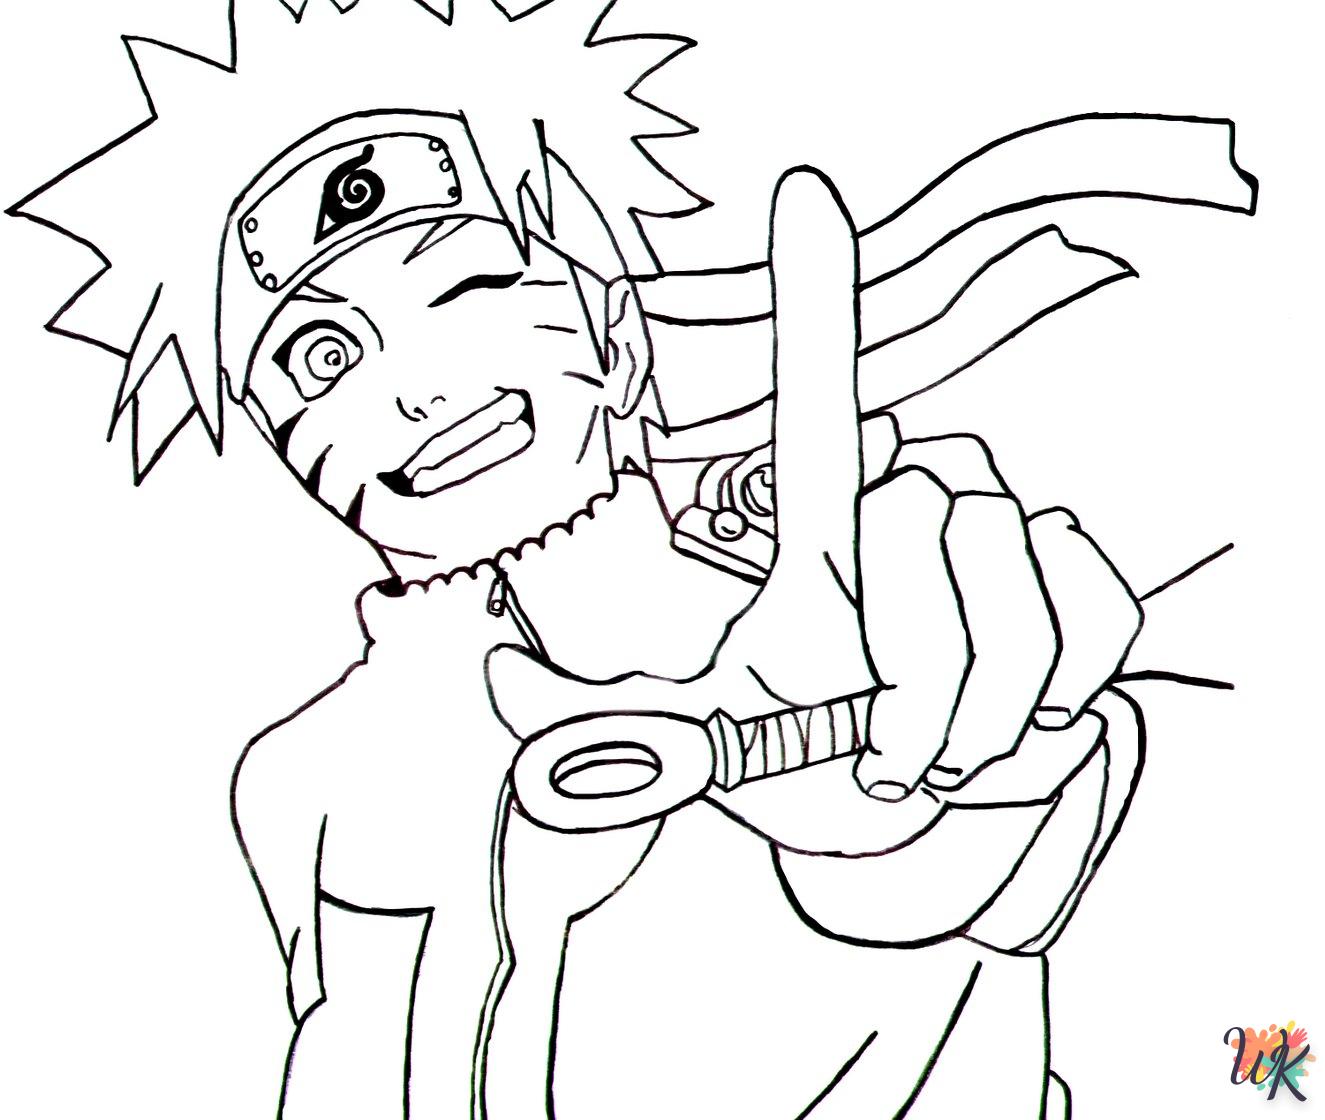 coloring Naruto  to print for 6 year old child